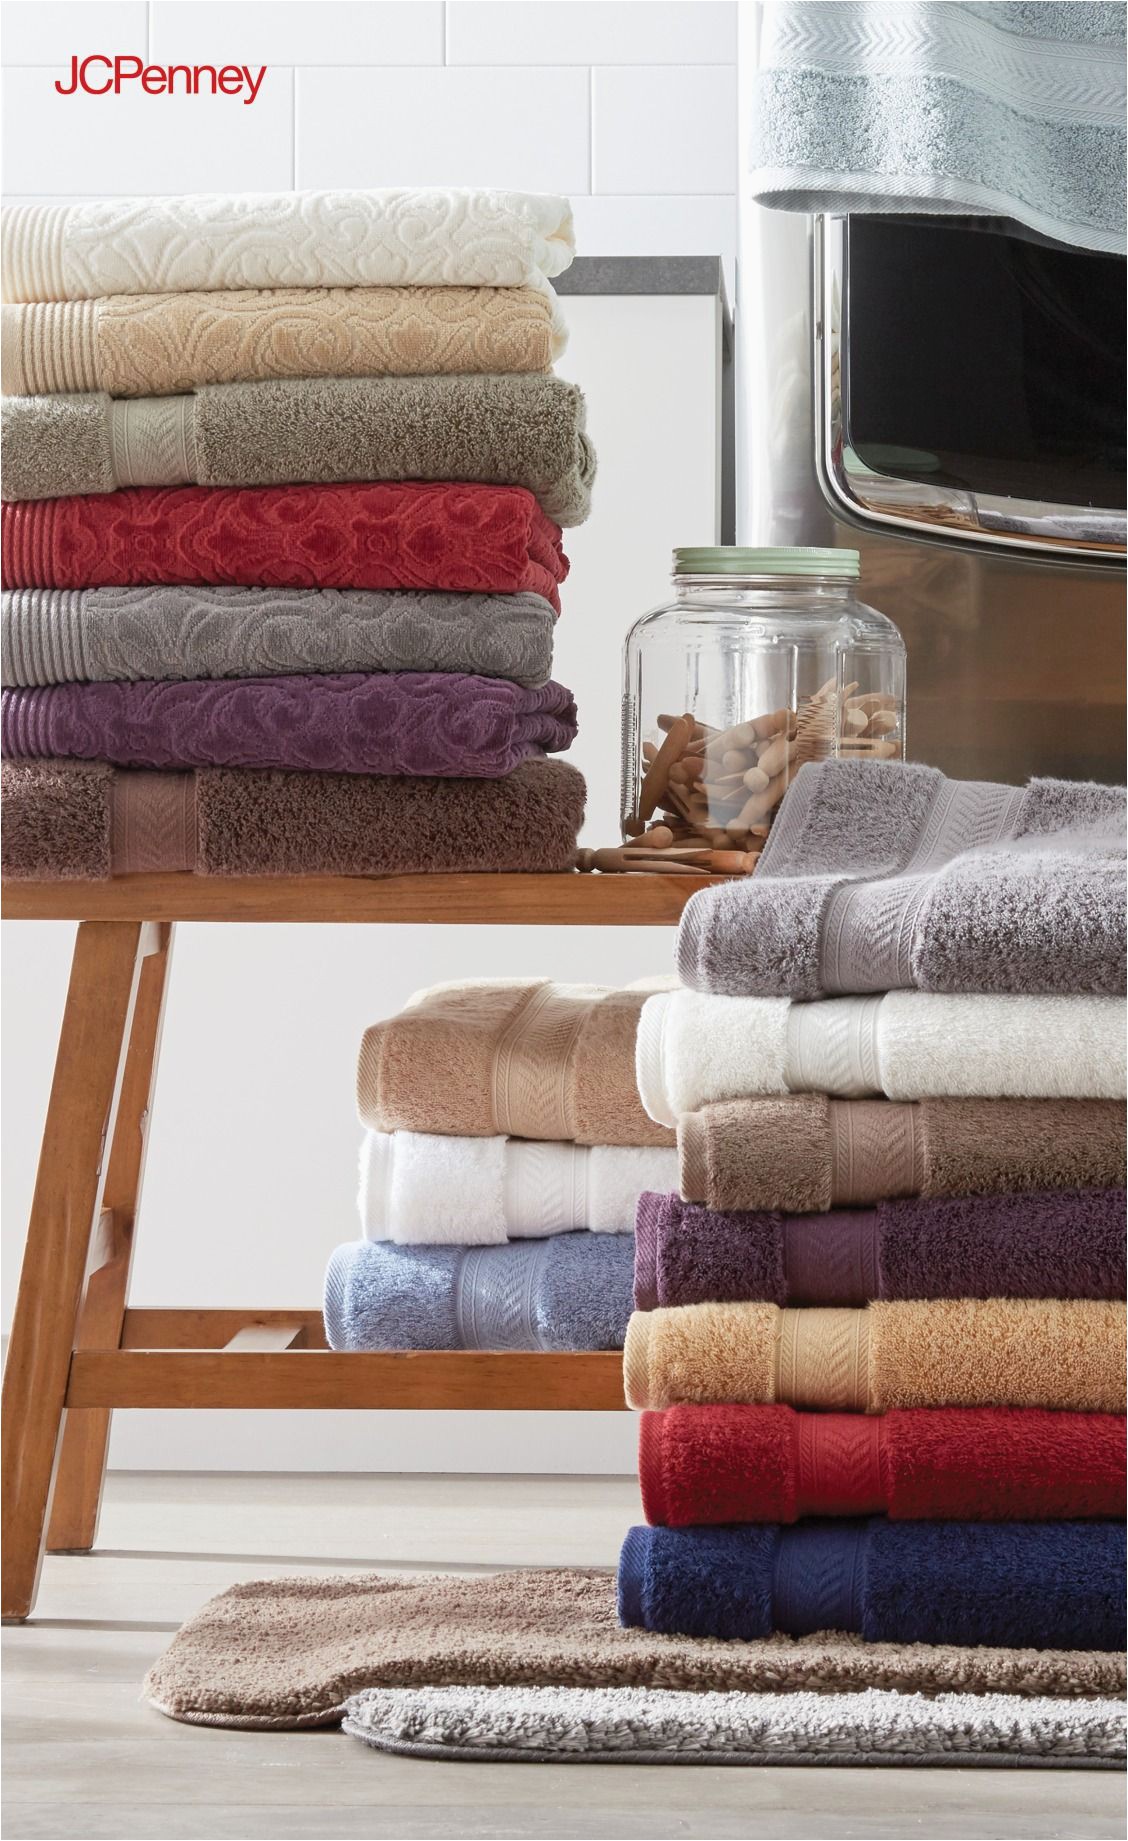 Jcpenney Bath towels and Rugs Lush Plush and Thristy A Royal Velvet Bath towel